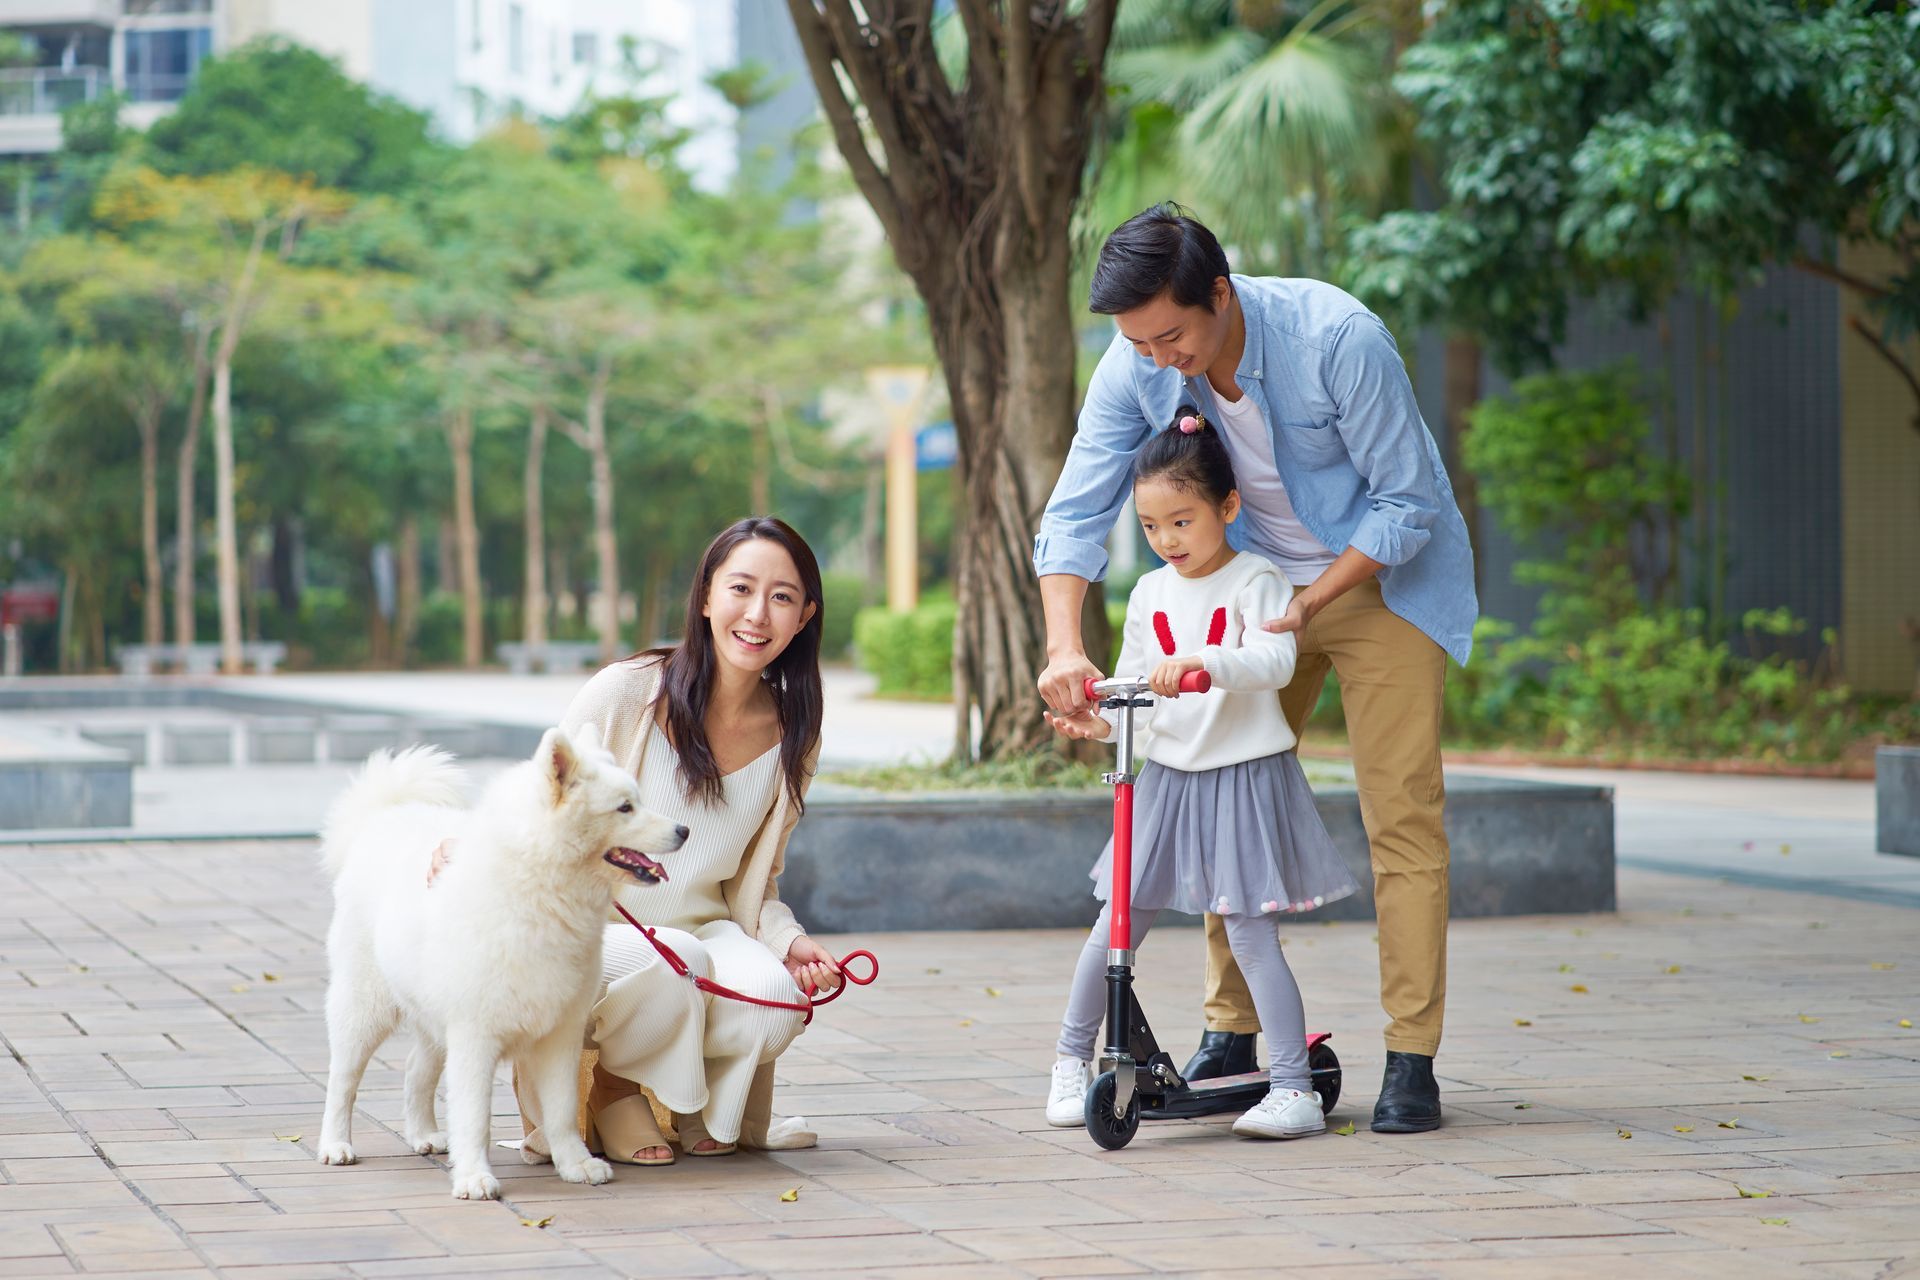 A family is playing with a dog and a scooter in a park.